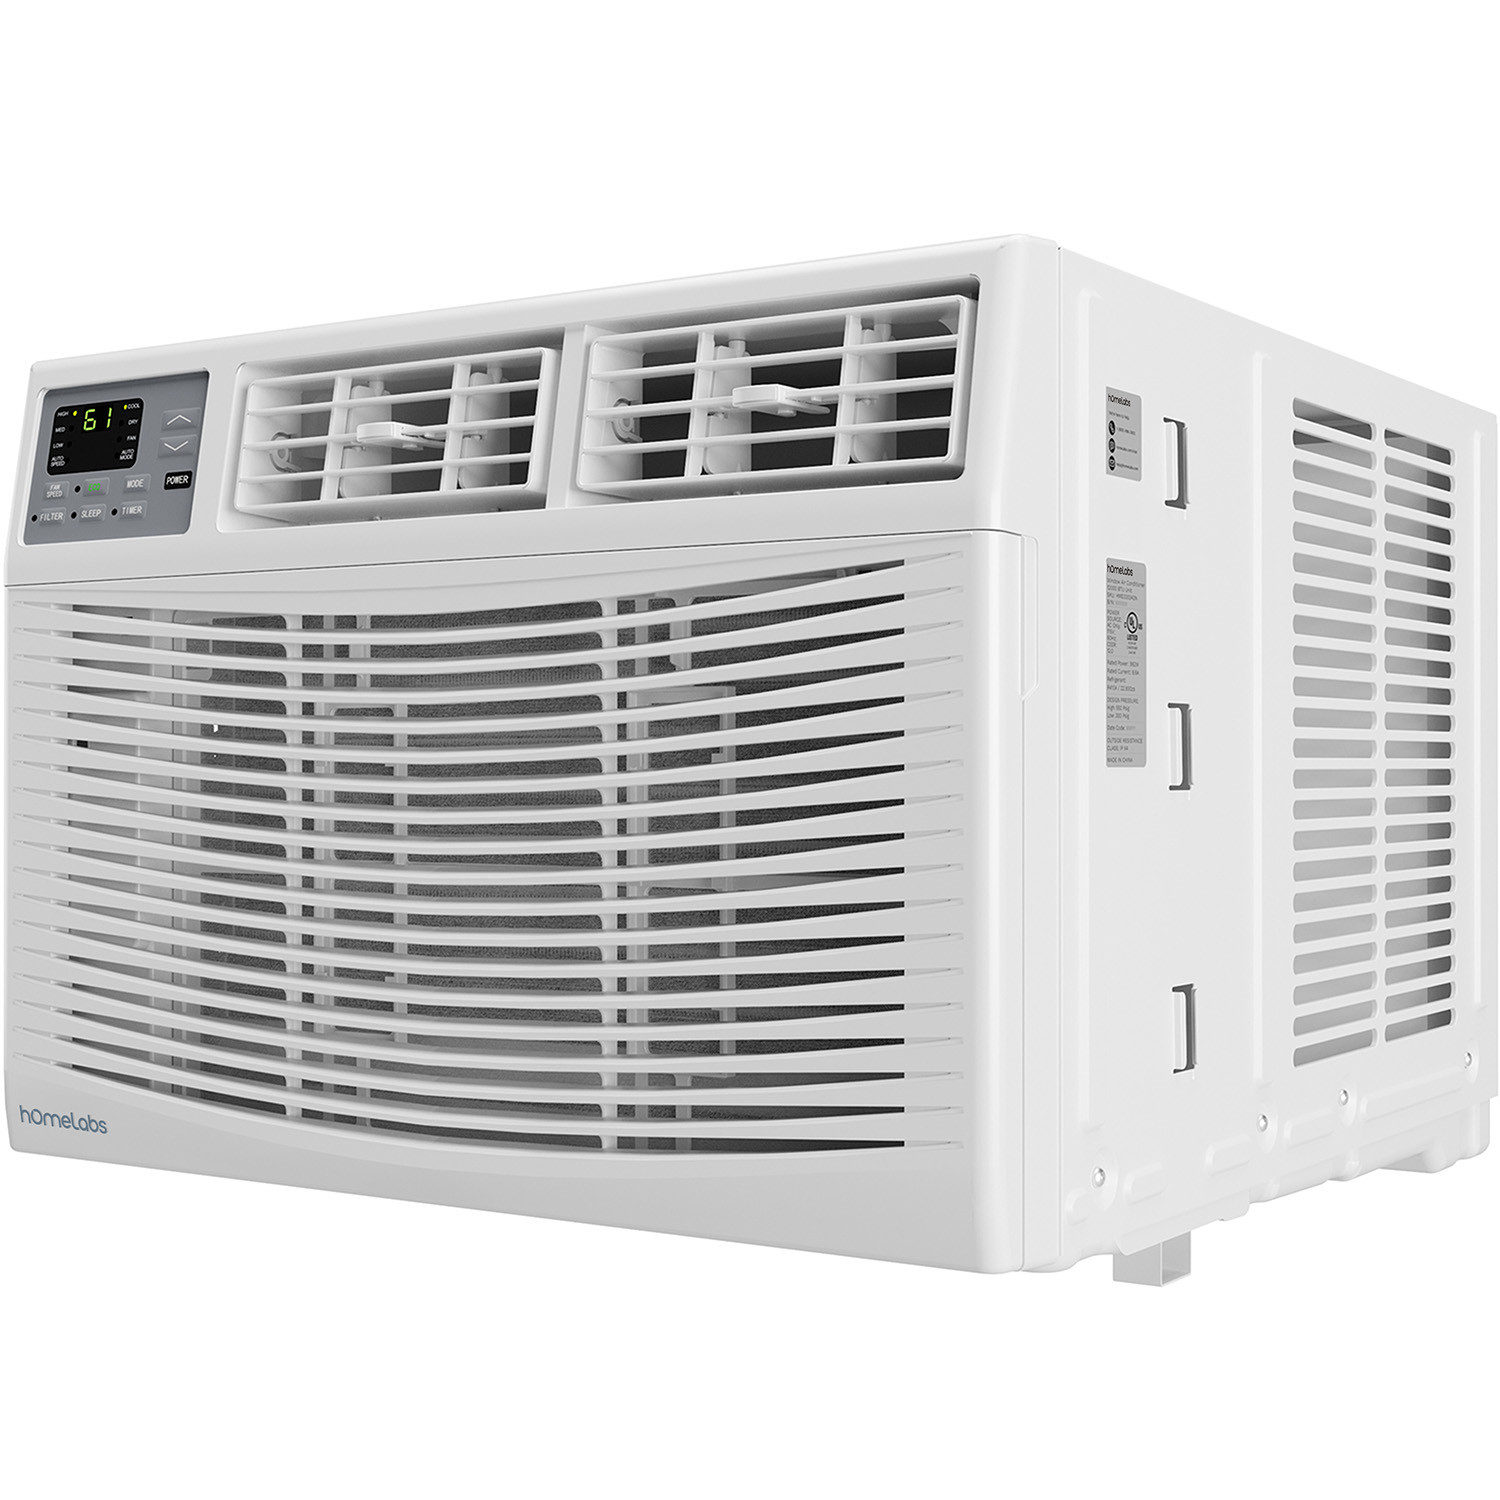 hOmeLabs 12,000 BTU Window Air Conditioner - Energy efficient AC Unit with Digital Thermostat and Easy-to-Use Remote Control - Ideal for Rooms up to 550 Square Feet - image 1 of 10